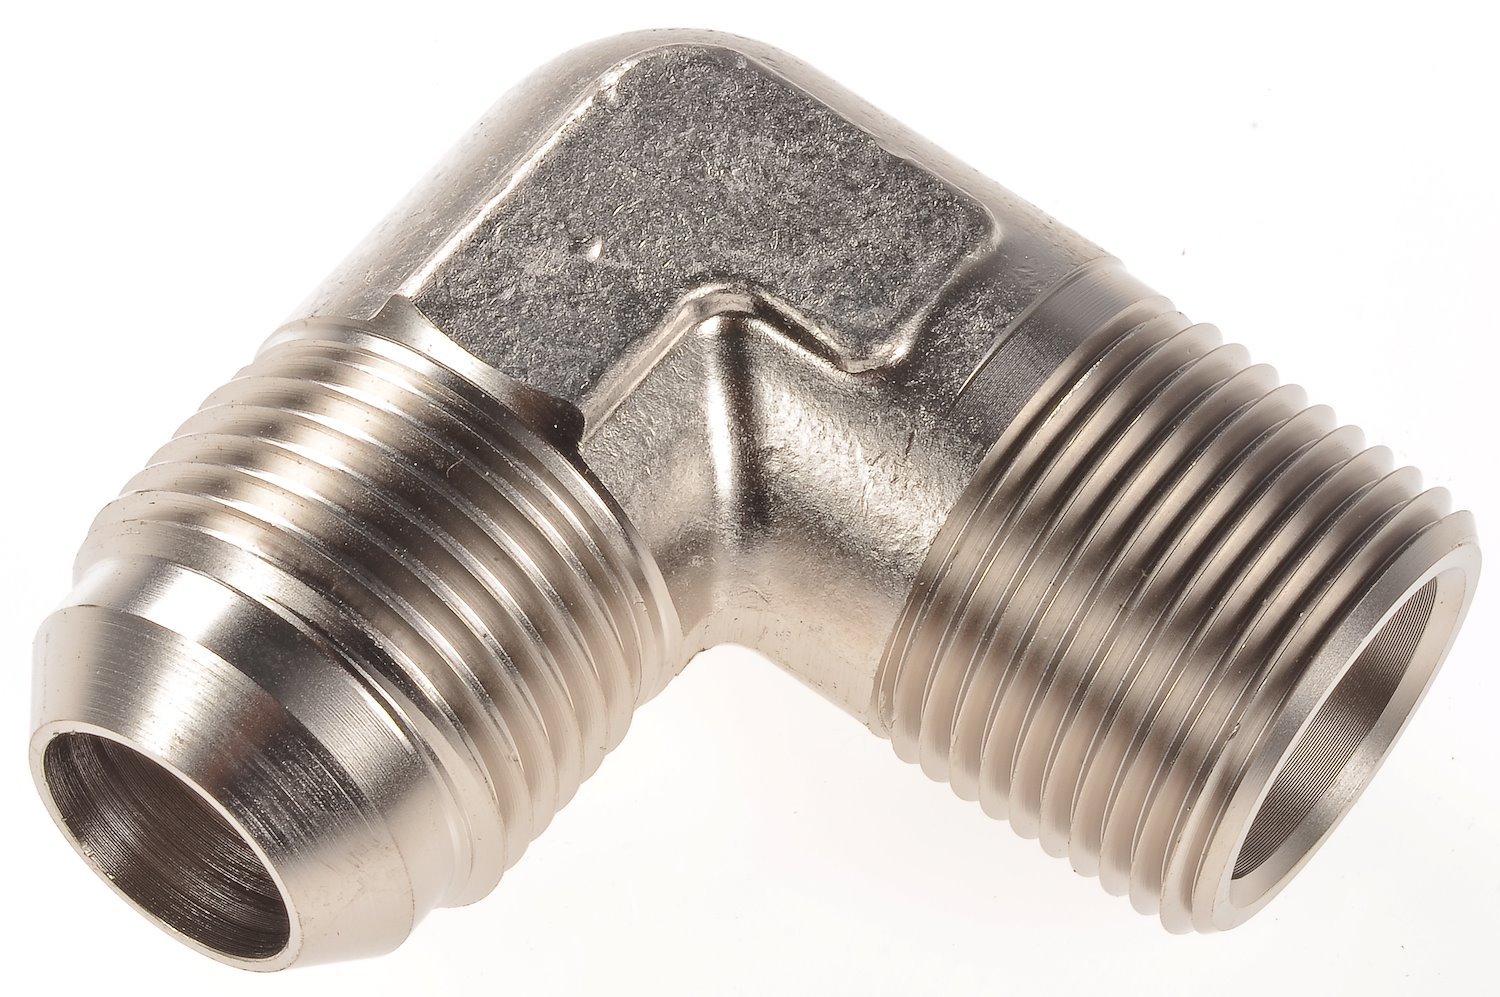 AN to NPT 90-Degree Adapter Fitting [-12 AN Male to 3/4 in. NPT Male, Nickel]